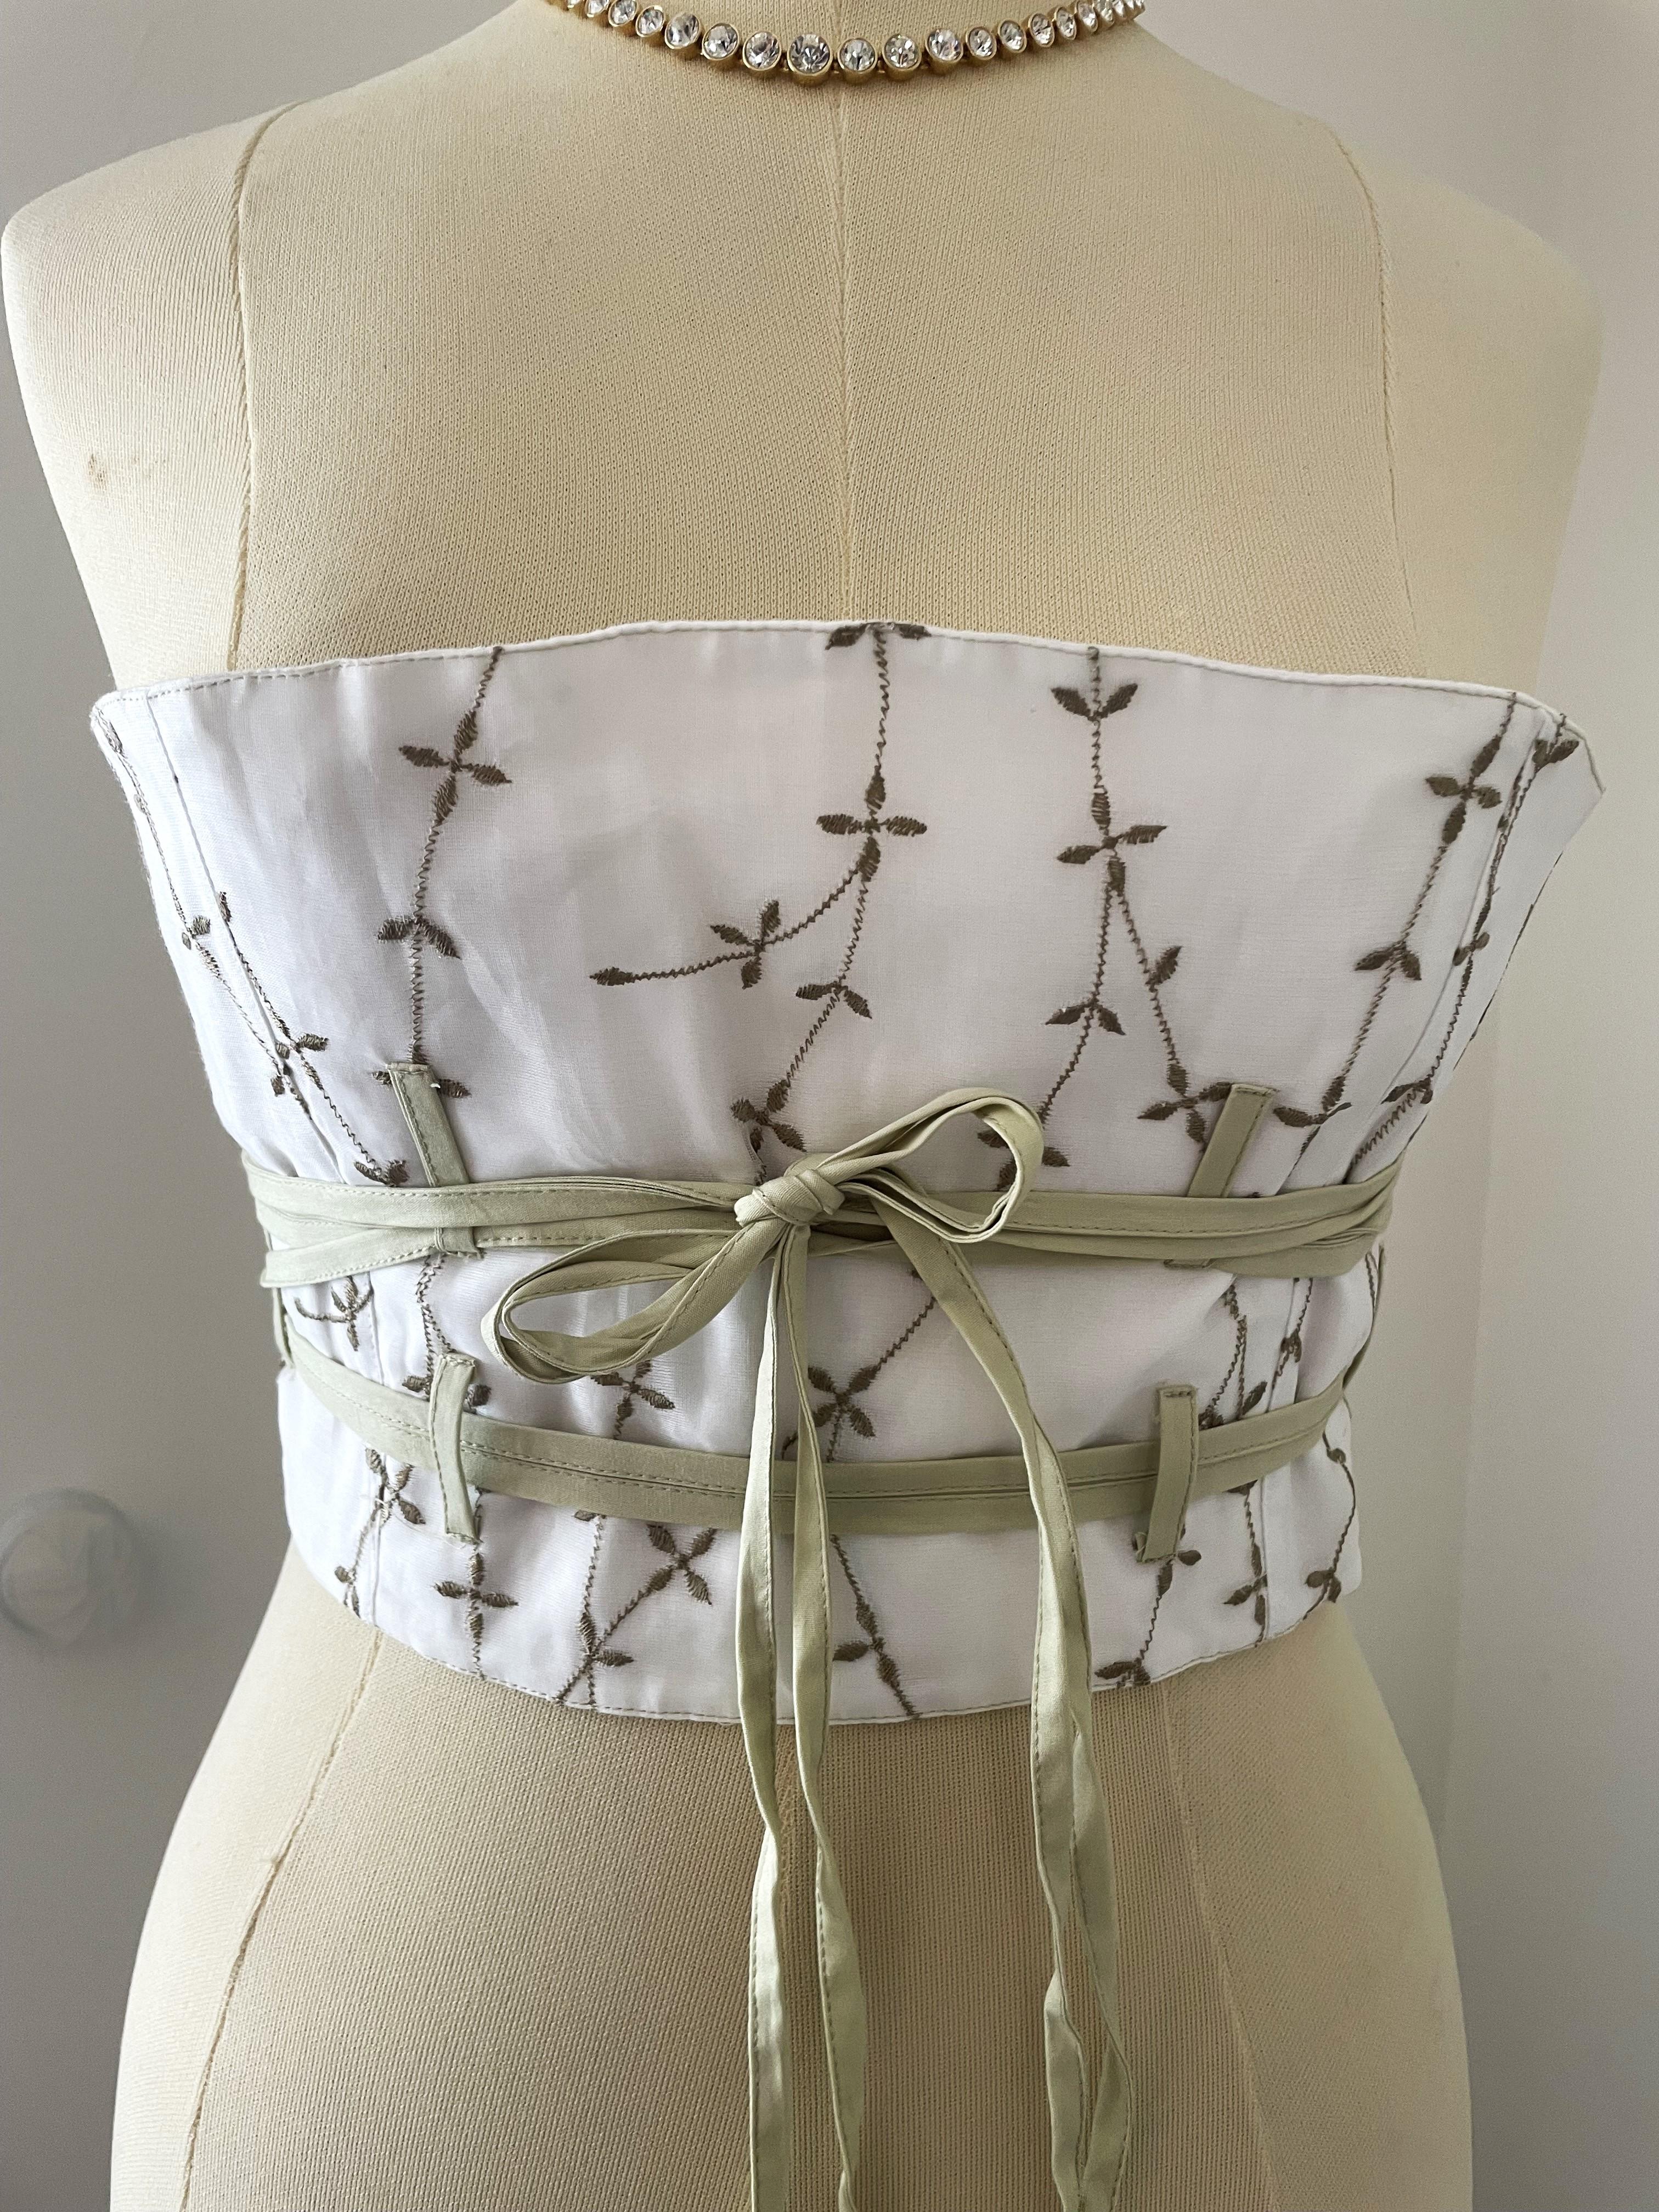 Anne Fontaine is primarily known for her white shirts, she has also designed various other clothing items, including tops. In the 1990s, bandeau tops were a popular fashion trend. But now this very good kept one-of-a kind item is still popular! 

A